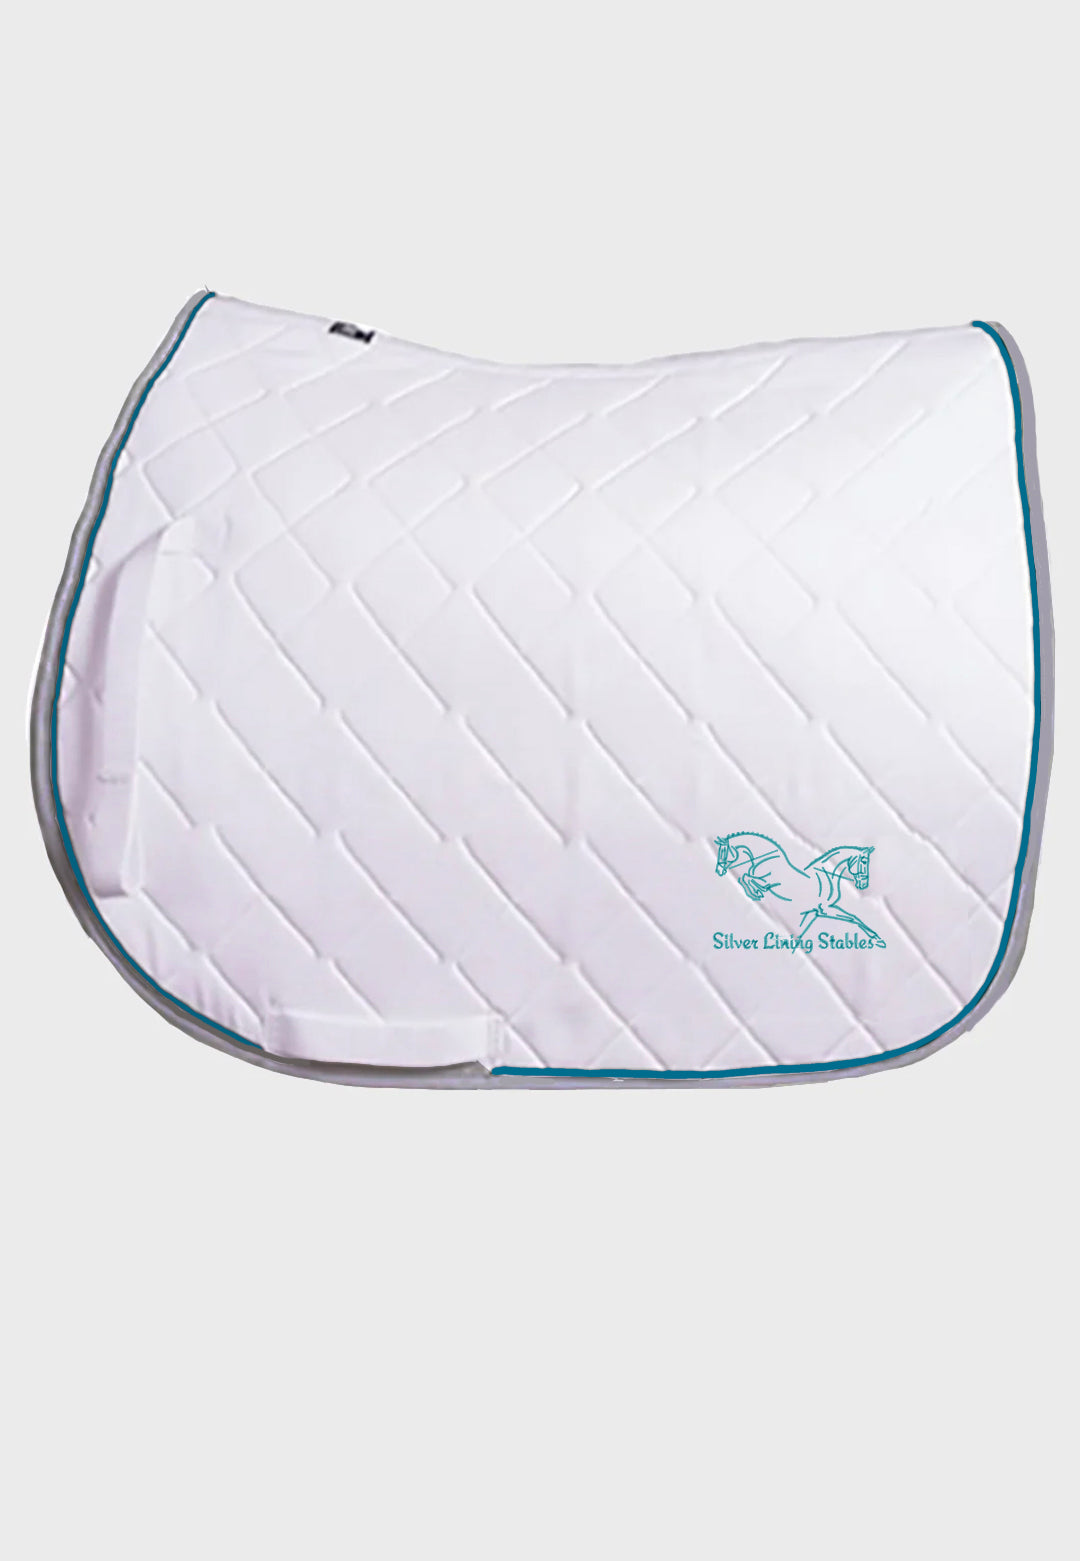 Silver Lining Stables Jacks All-Purpose Saddle Pad